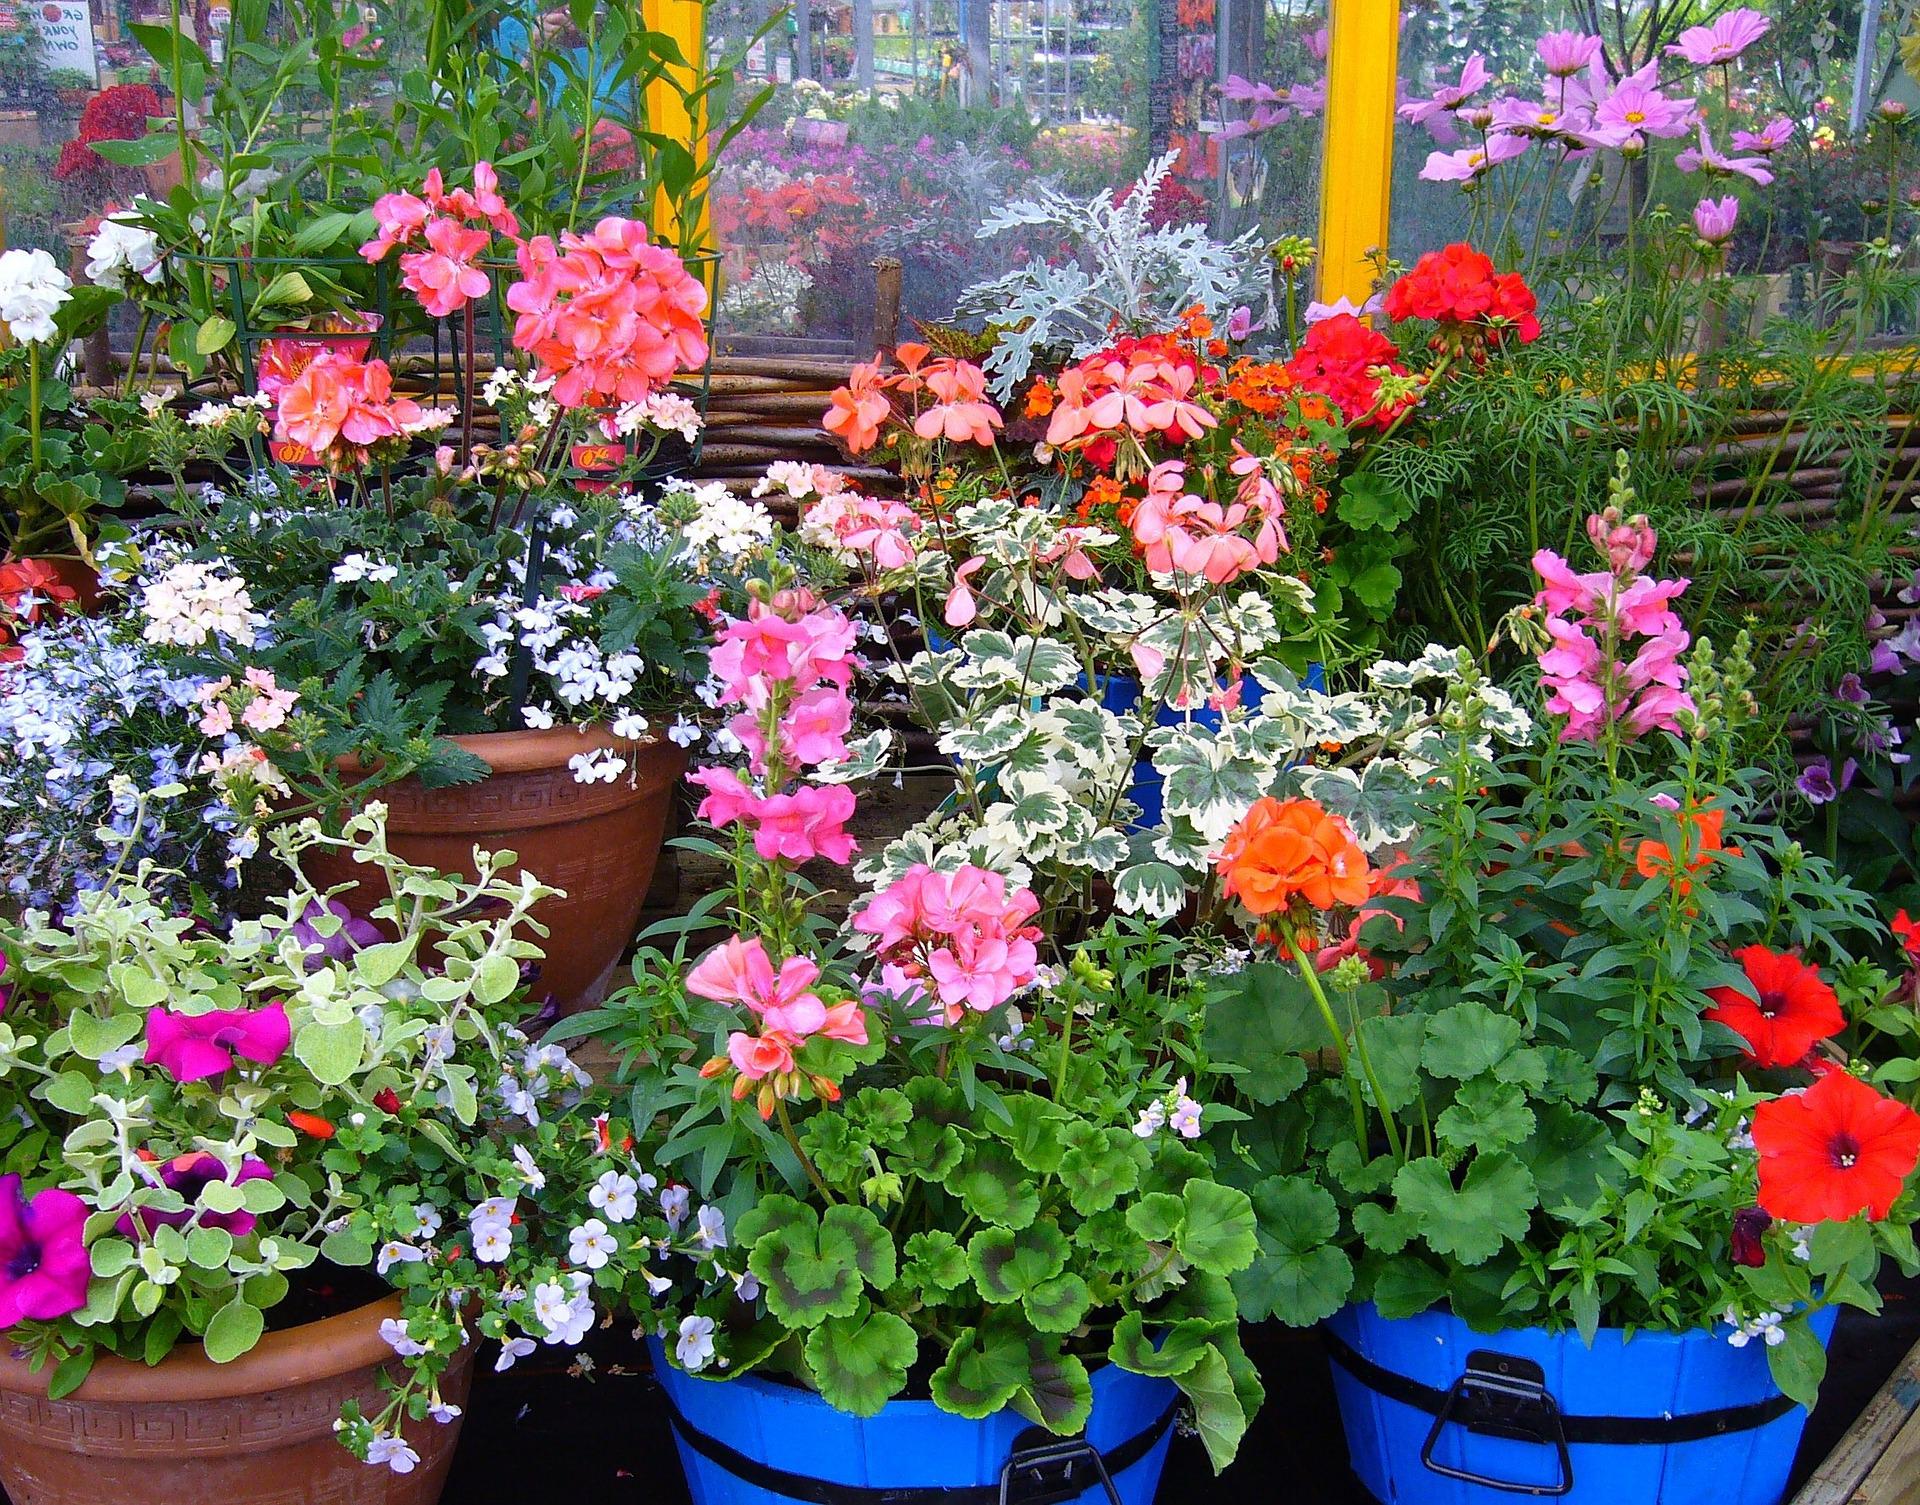 The Best Plants To Grow In Containers: Geraniums in pots